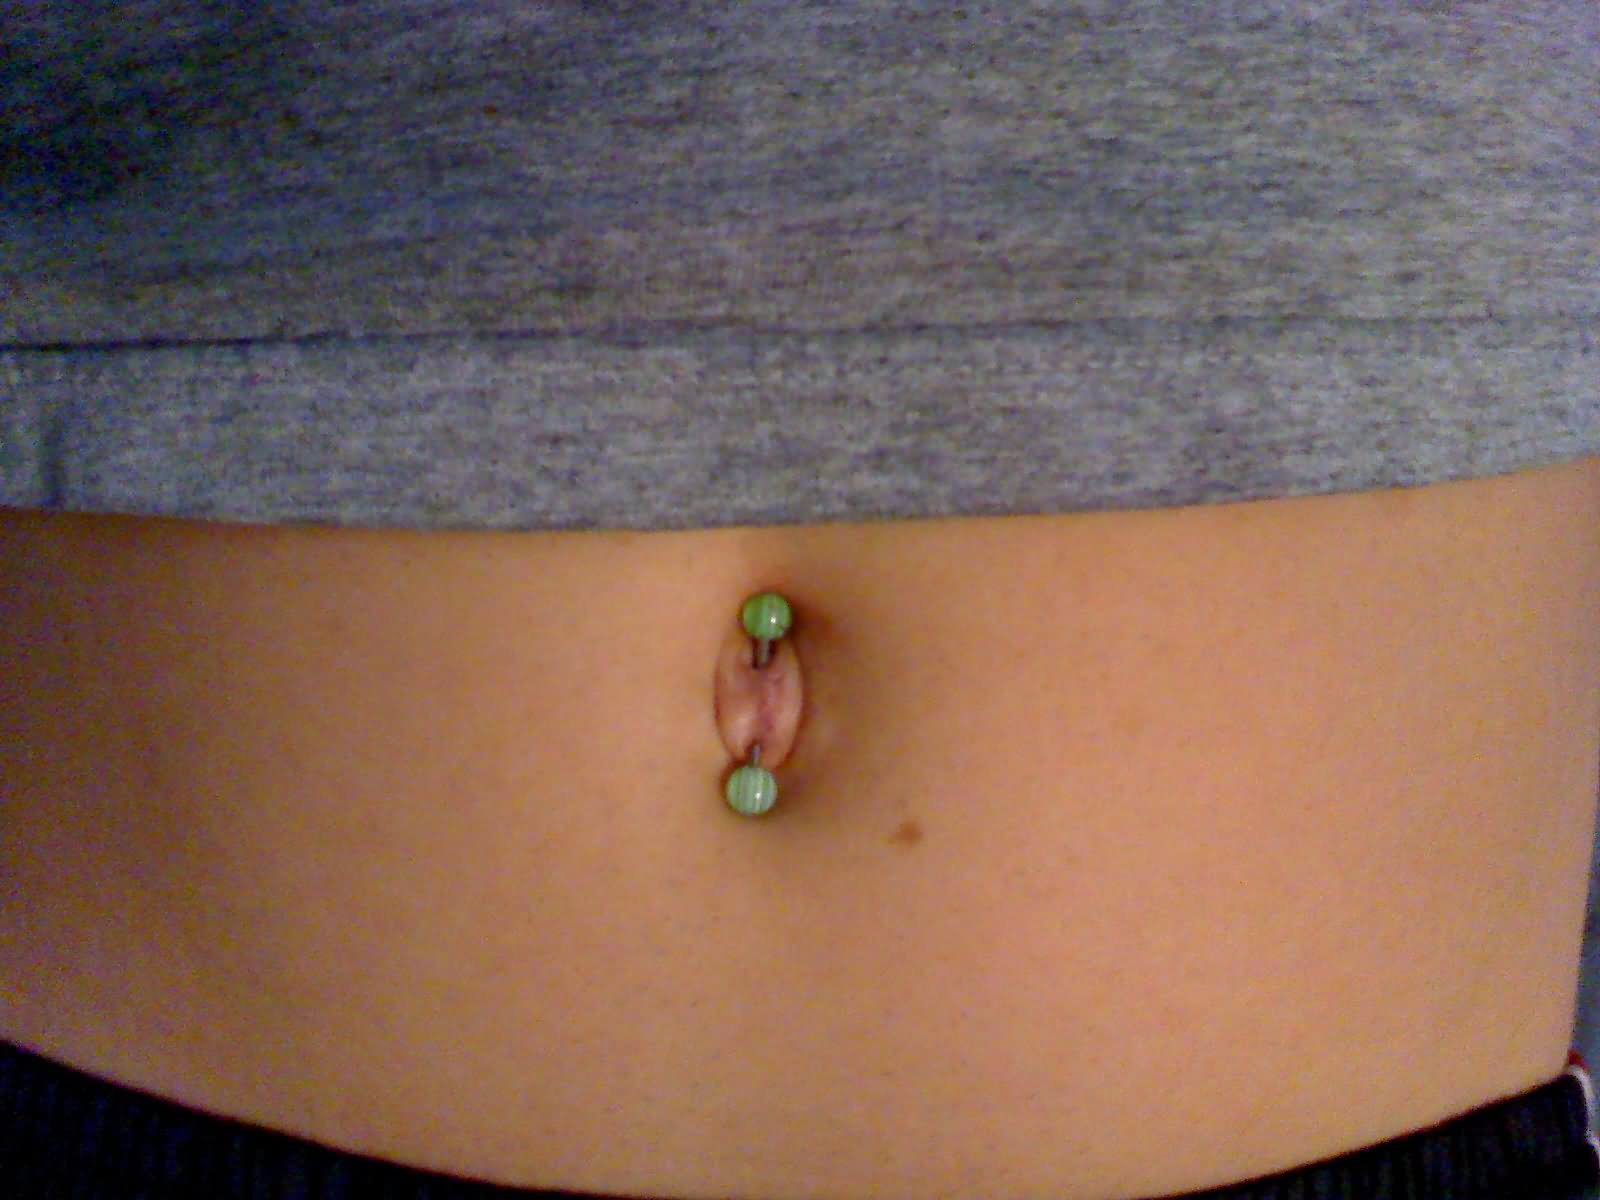 Belly Piercing With Green Barbell